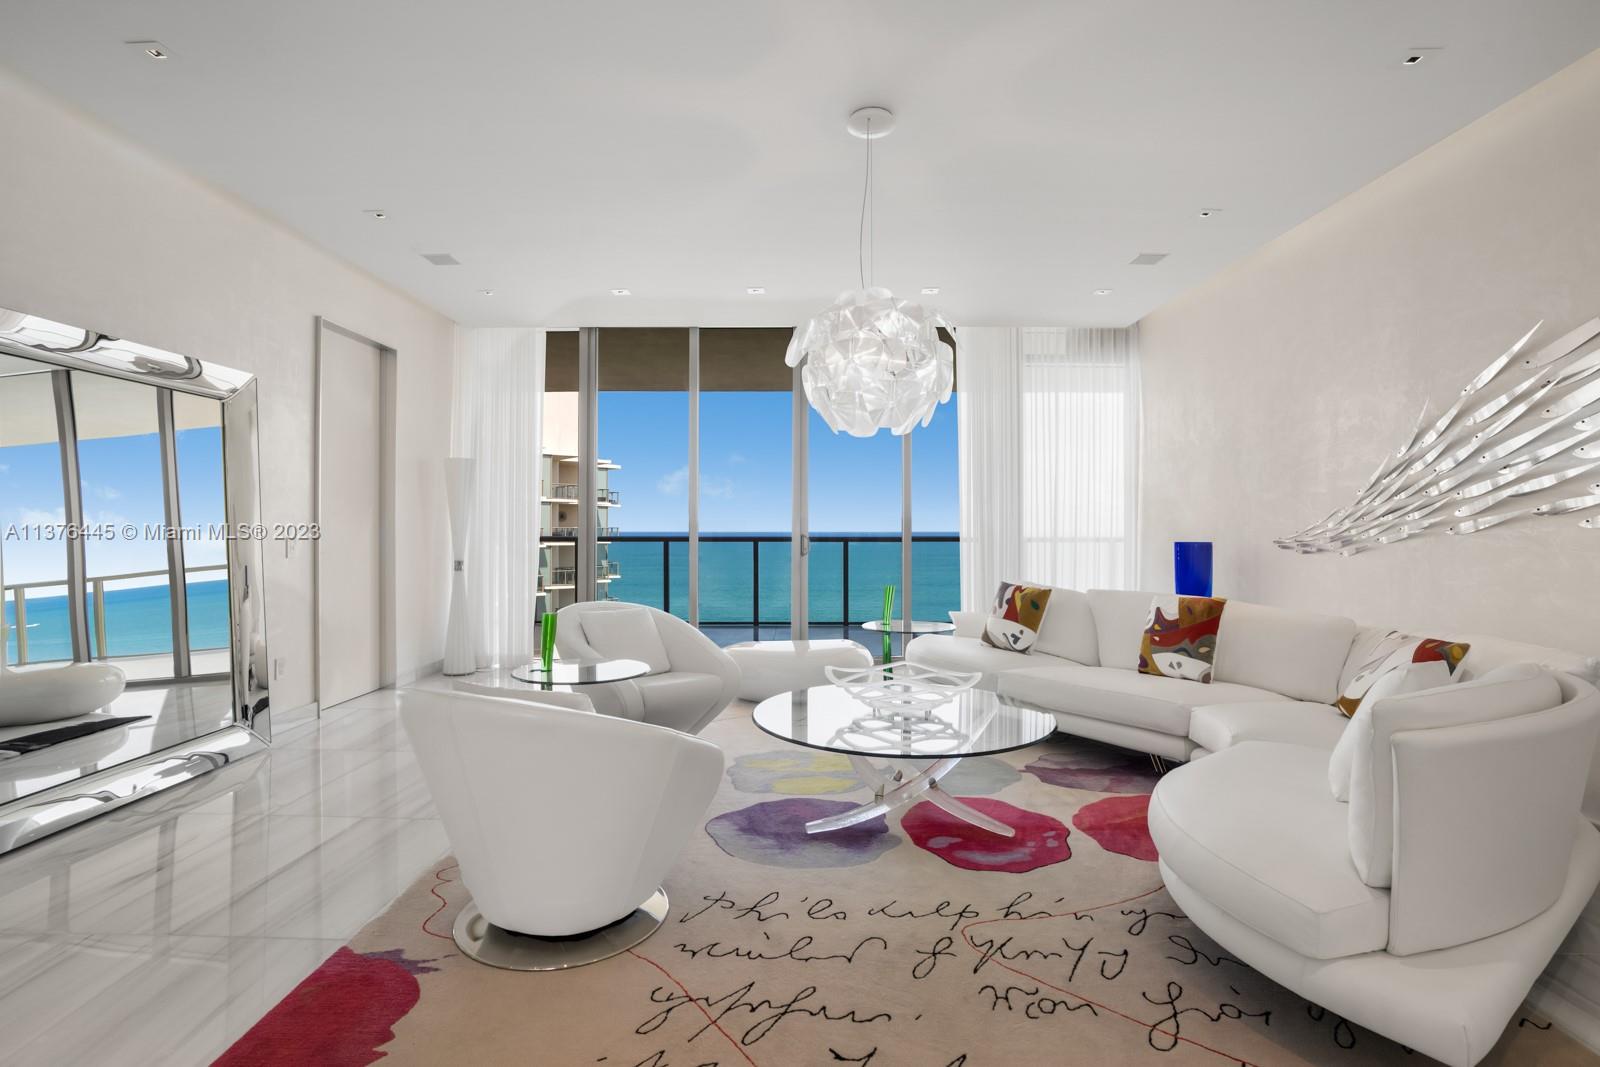 Introducing the Lower Penthouse at the highly sought after St. Regis Bal Harbour. This stunning unit offers breathtaking panoramic ocean views, with floor-to-ceiling windows that flood the space with natural light. Experience an open floor plan that seamlessly blends indoor &amp; outdoor living. The fully equipped kitchen is complete with top-of-the-line appliances, custom cabinetry, &amp; a large island. The adjacent dining area offers plenty of space to gather &amp; take in the breathtaking Miami skyline. Residents can enjoy unparalleled amenities, including a spa, fitness center, pool, beach services, &amp; 24-hour concierge &amp; security. Just seconds away from the prestigious Bal Harbour Shops, this unit offers a luxurious lifestyle that is second to none.